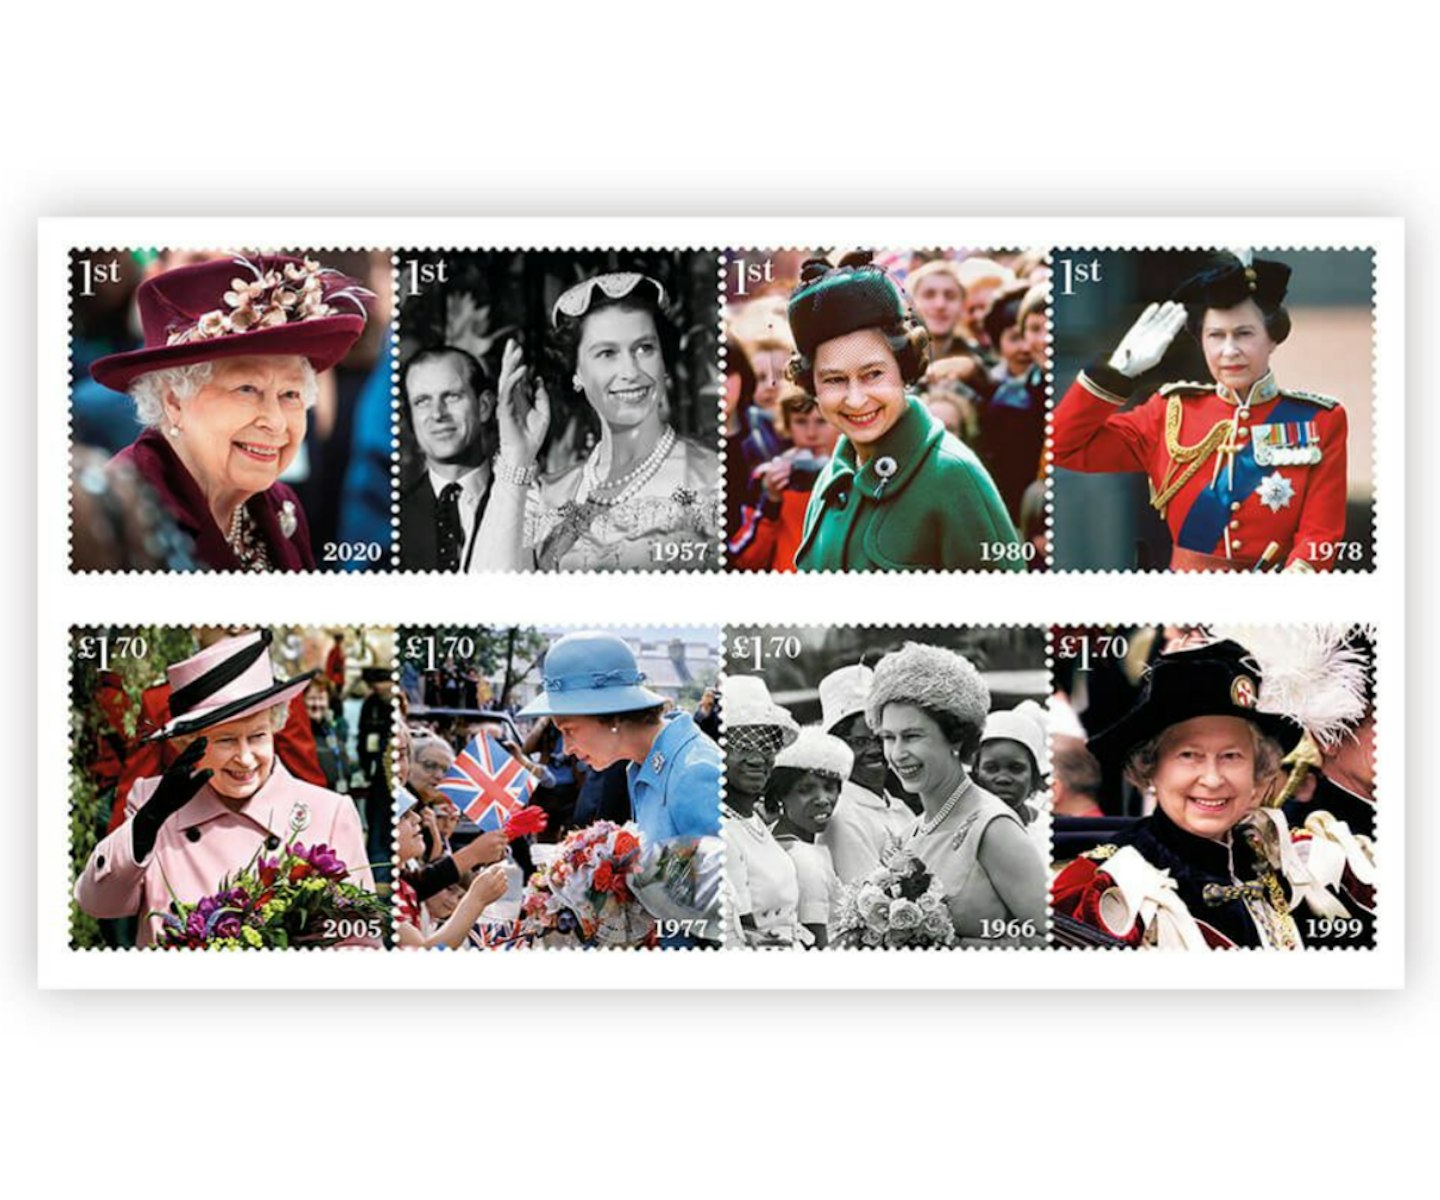 Her Majesty The Queen's Platinum Jubilee Stamp Set